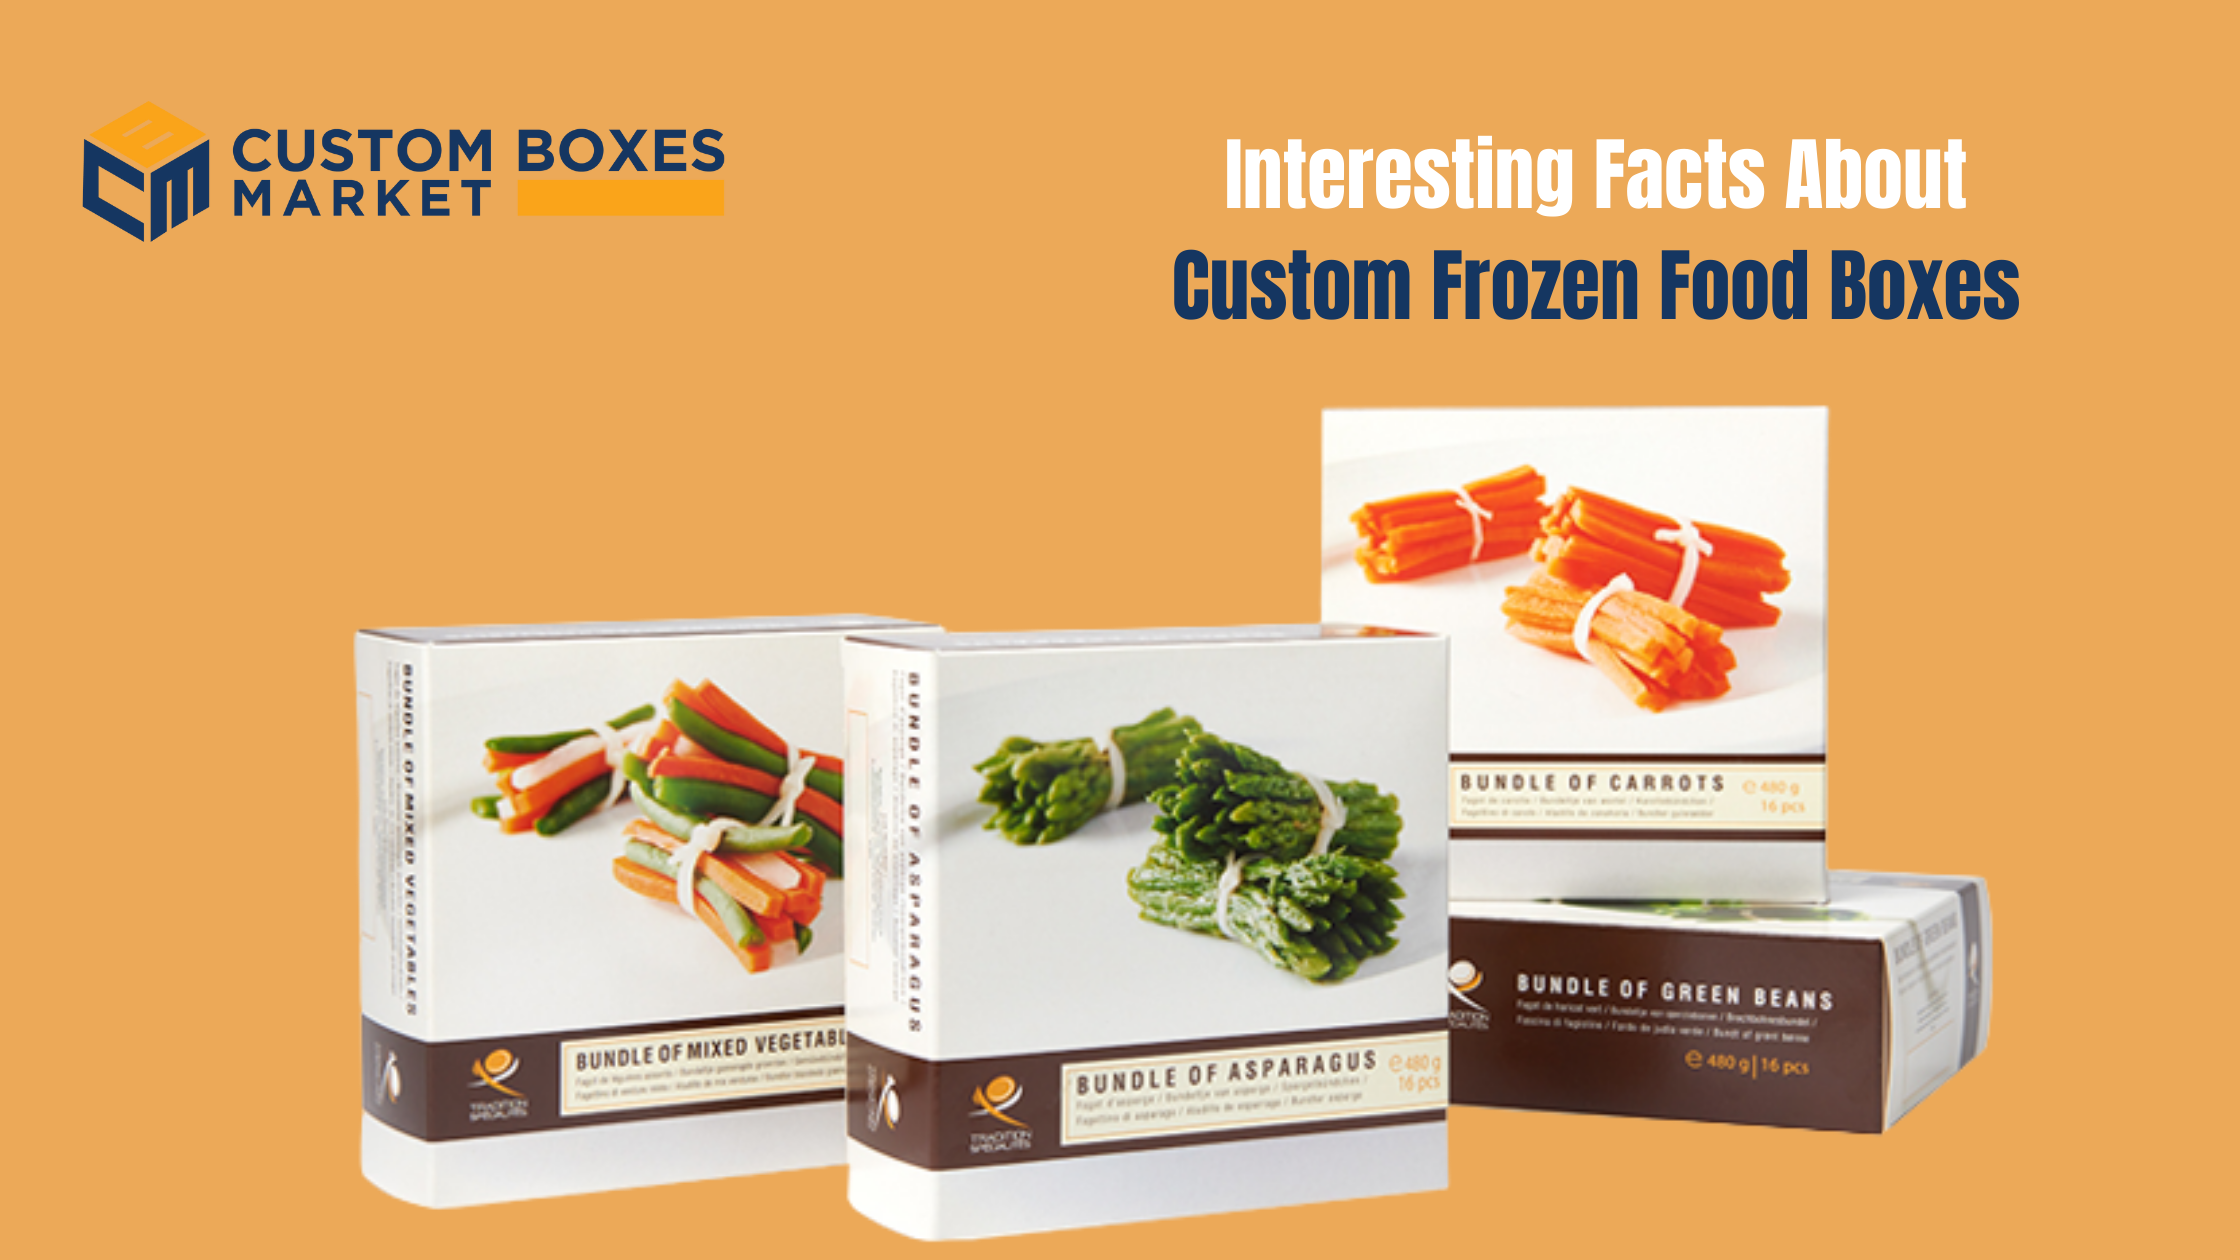 Interesting Facts About Custom Frozen Food Boxes